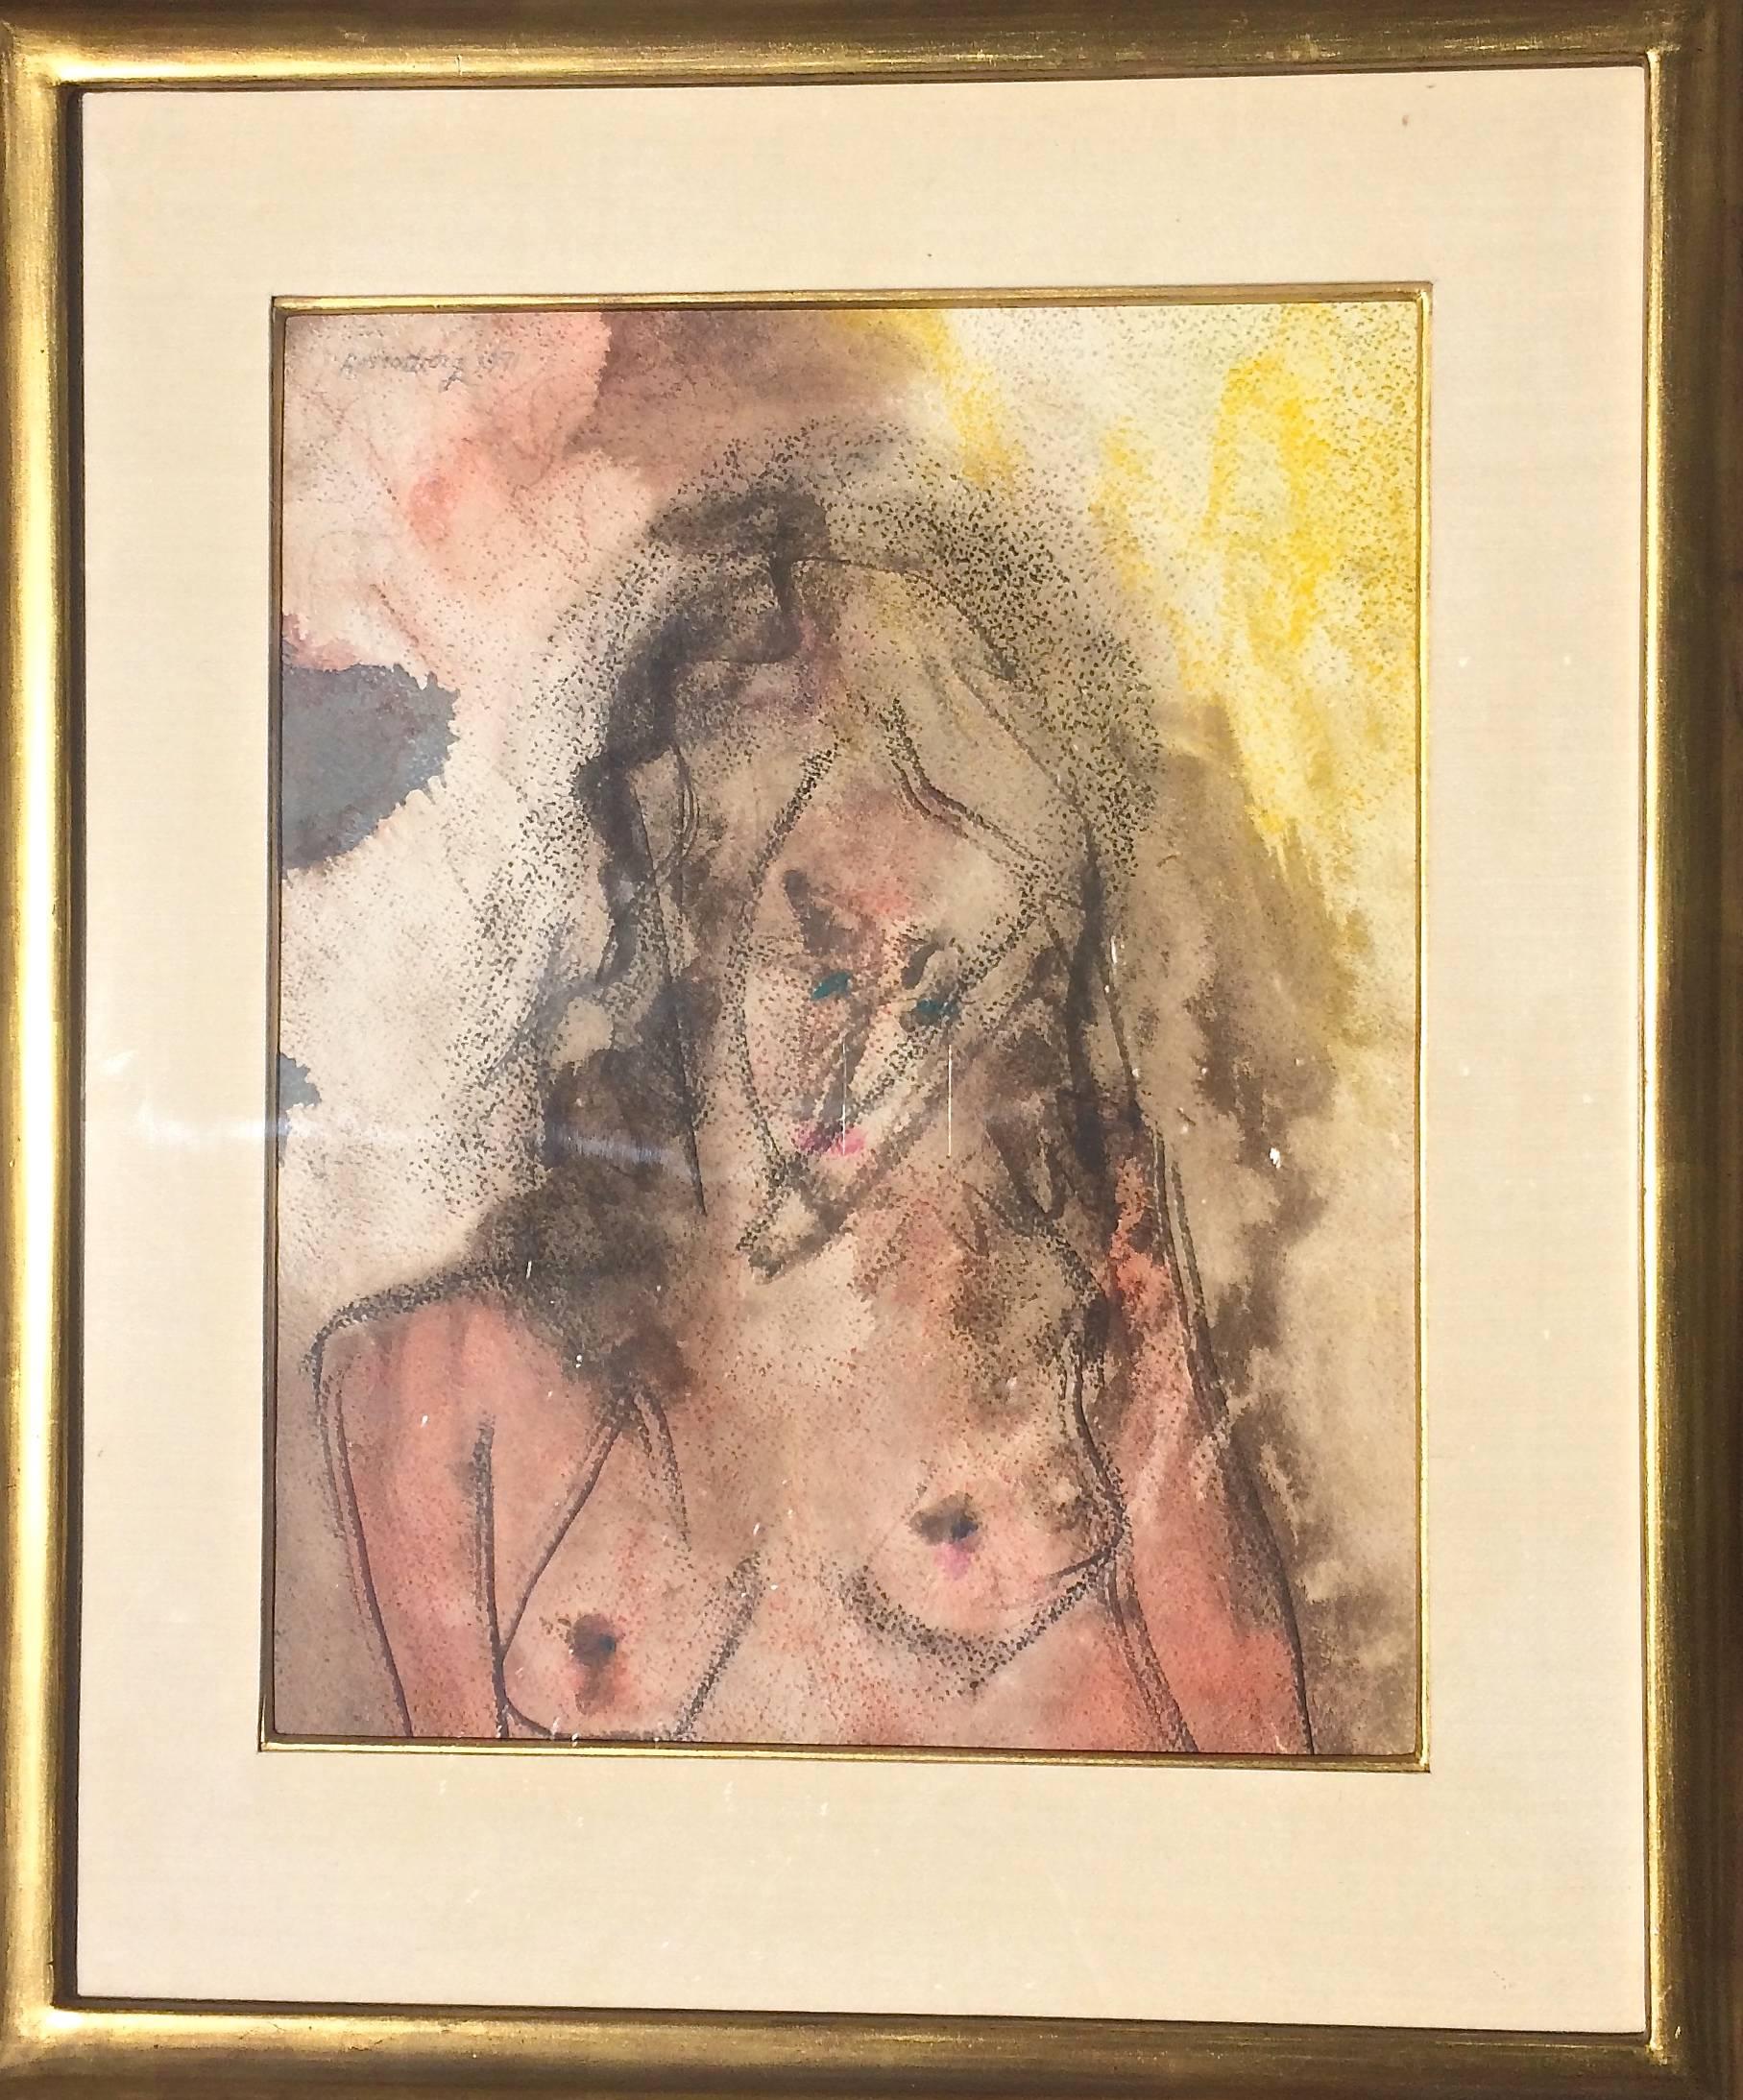  Young Woman Expressionist Watercolor - Abstract Expressionist Painting by Ralph Rosenborg